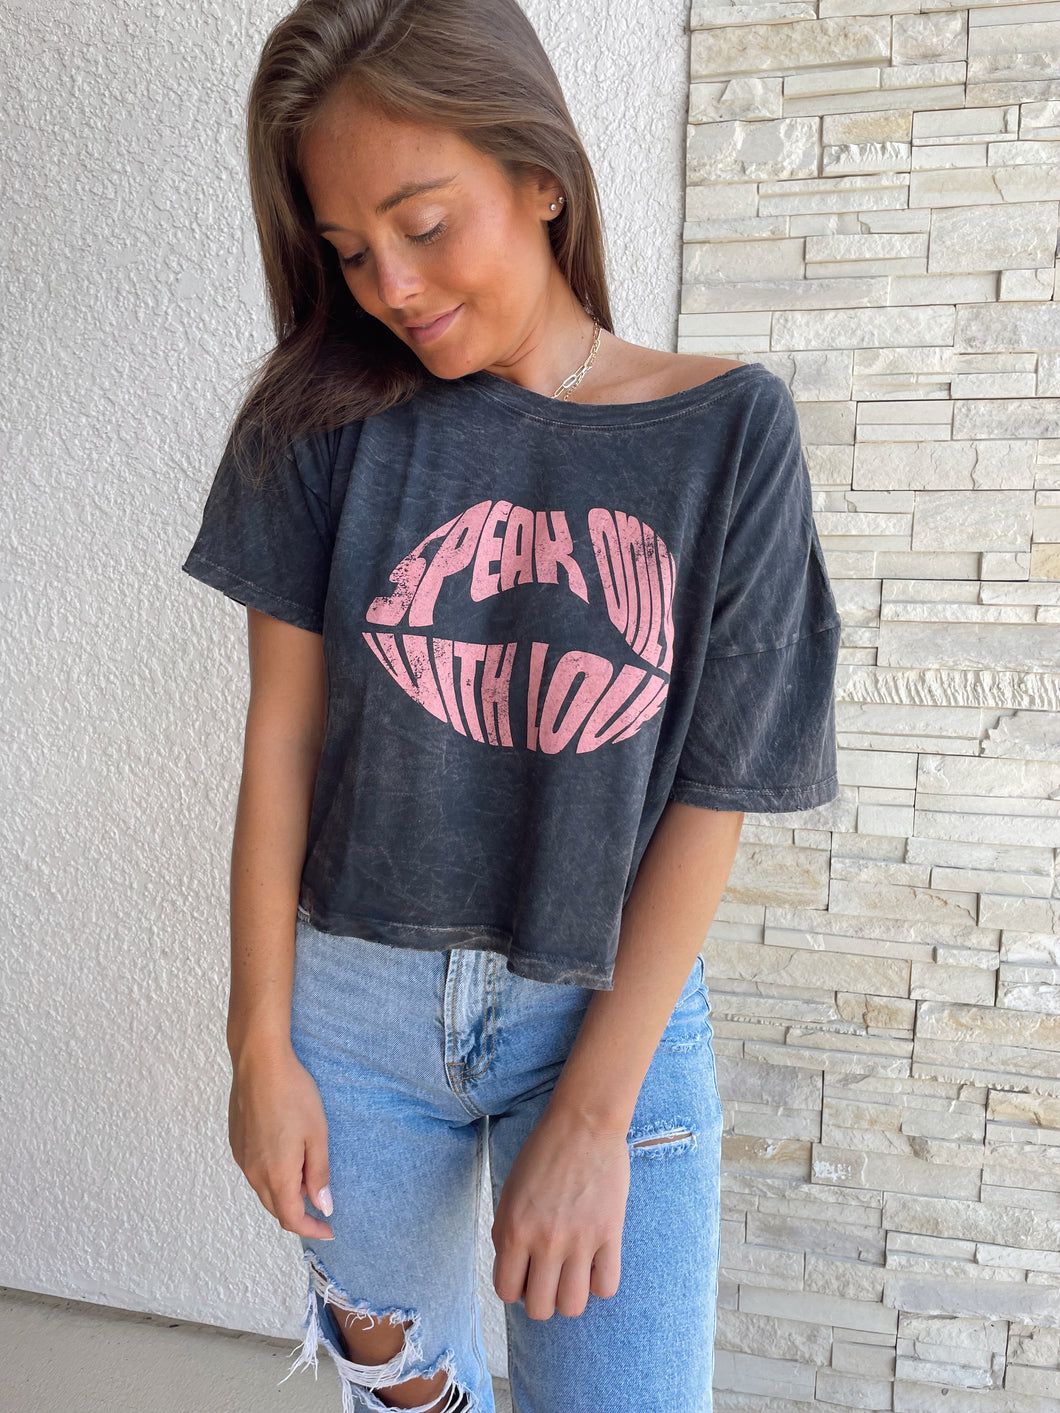 Speak Only With Love Graphic Tee